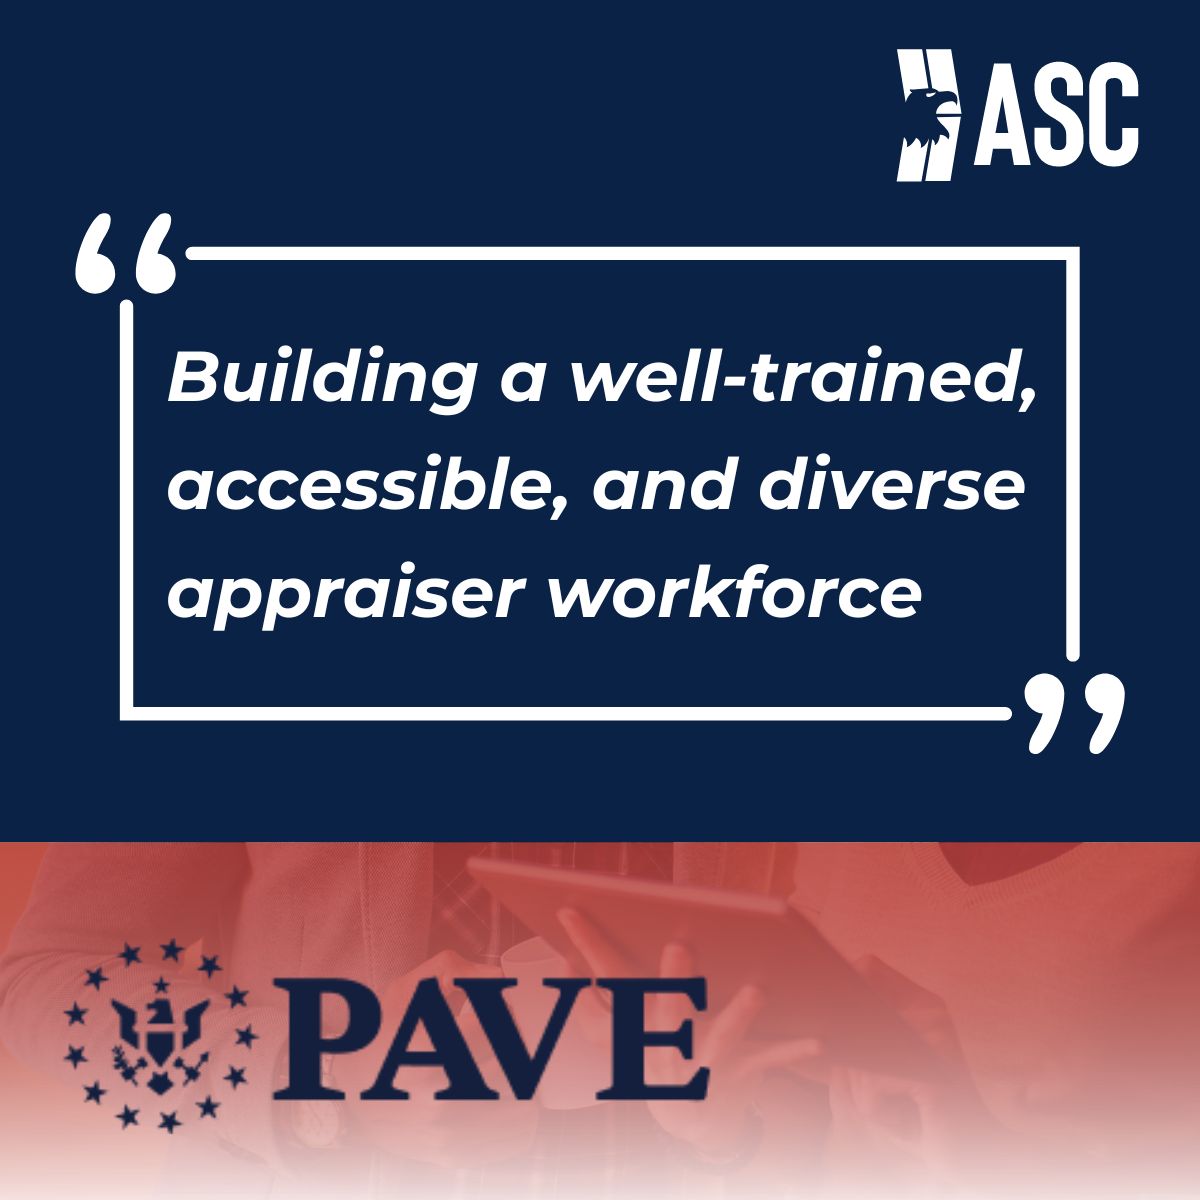 Today, we highlight Action 3 of the PAVE Action Plan: Building a well-trained, accessible, and diverse appraiser workforce. 

Visit pave.hud.gov to read the full PAVE Action Plan and to learn more about the Taskforce and its ongoing work.

#ASCgov #AppraisalBias #PAVE